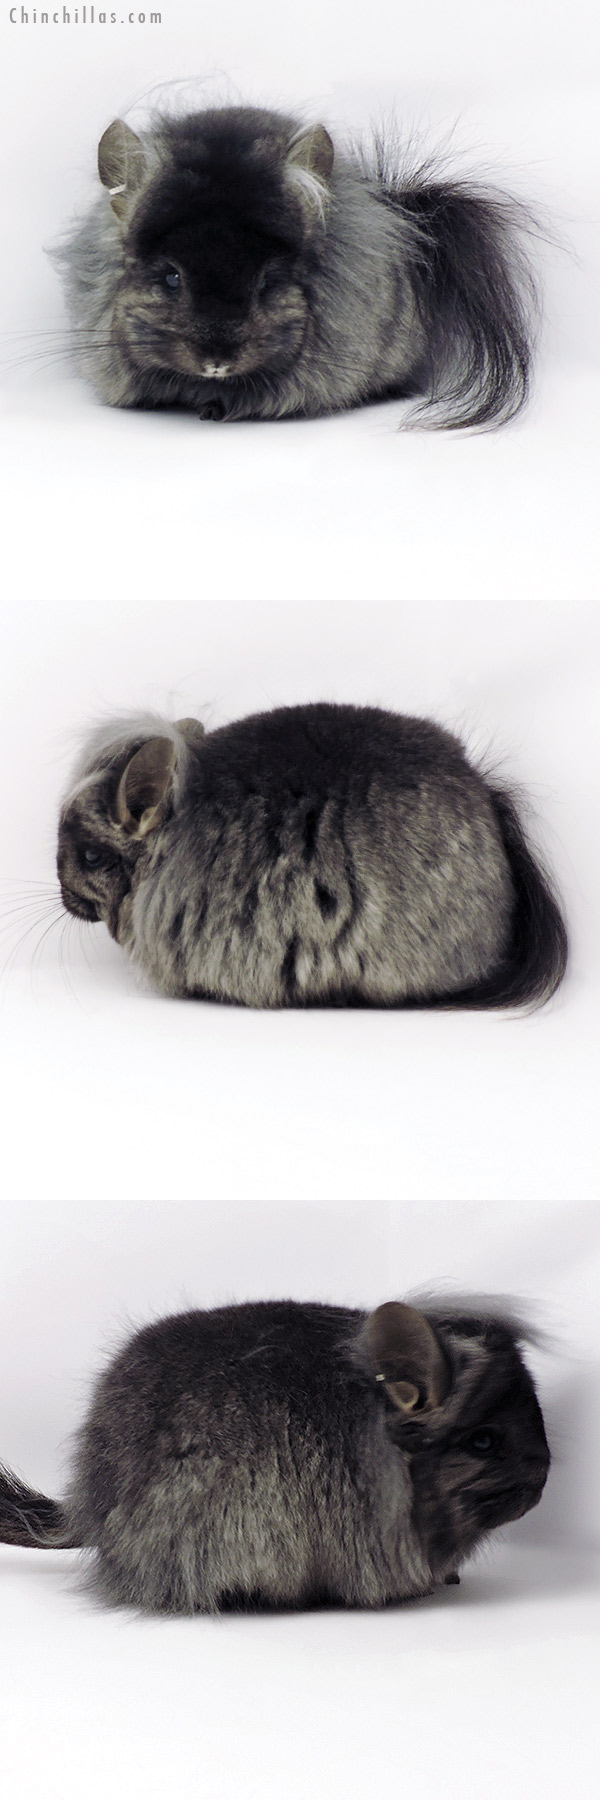 Chinchilla or related item offered for sale or export on Chinchillas.com - 19296 Exceptional Ebony ( Locken Carrier ) G3  Royal Persian Angora Female Chinchilla